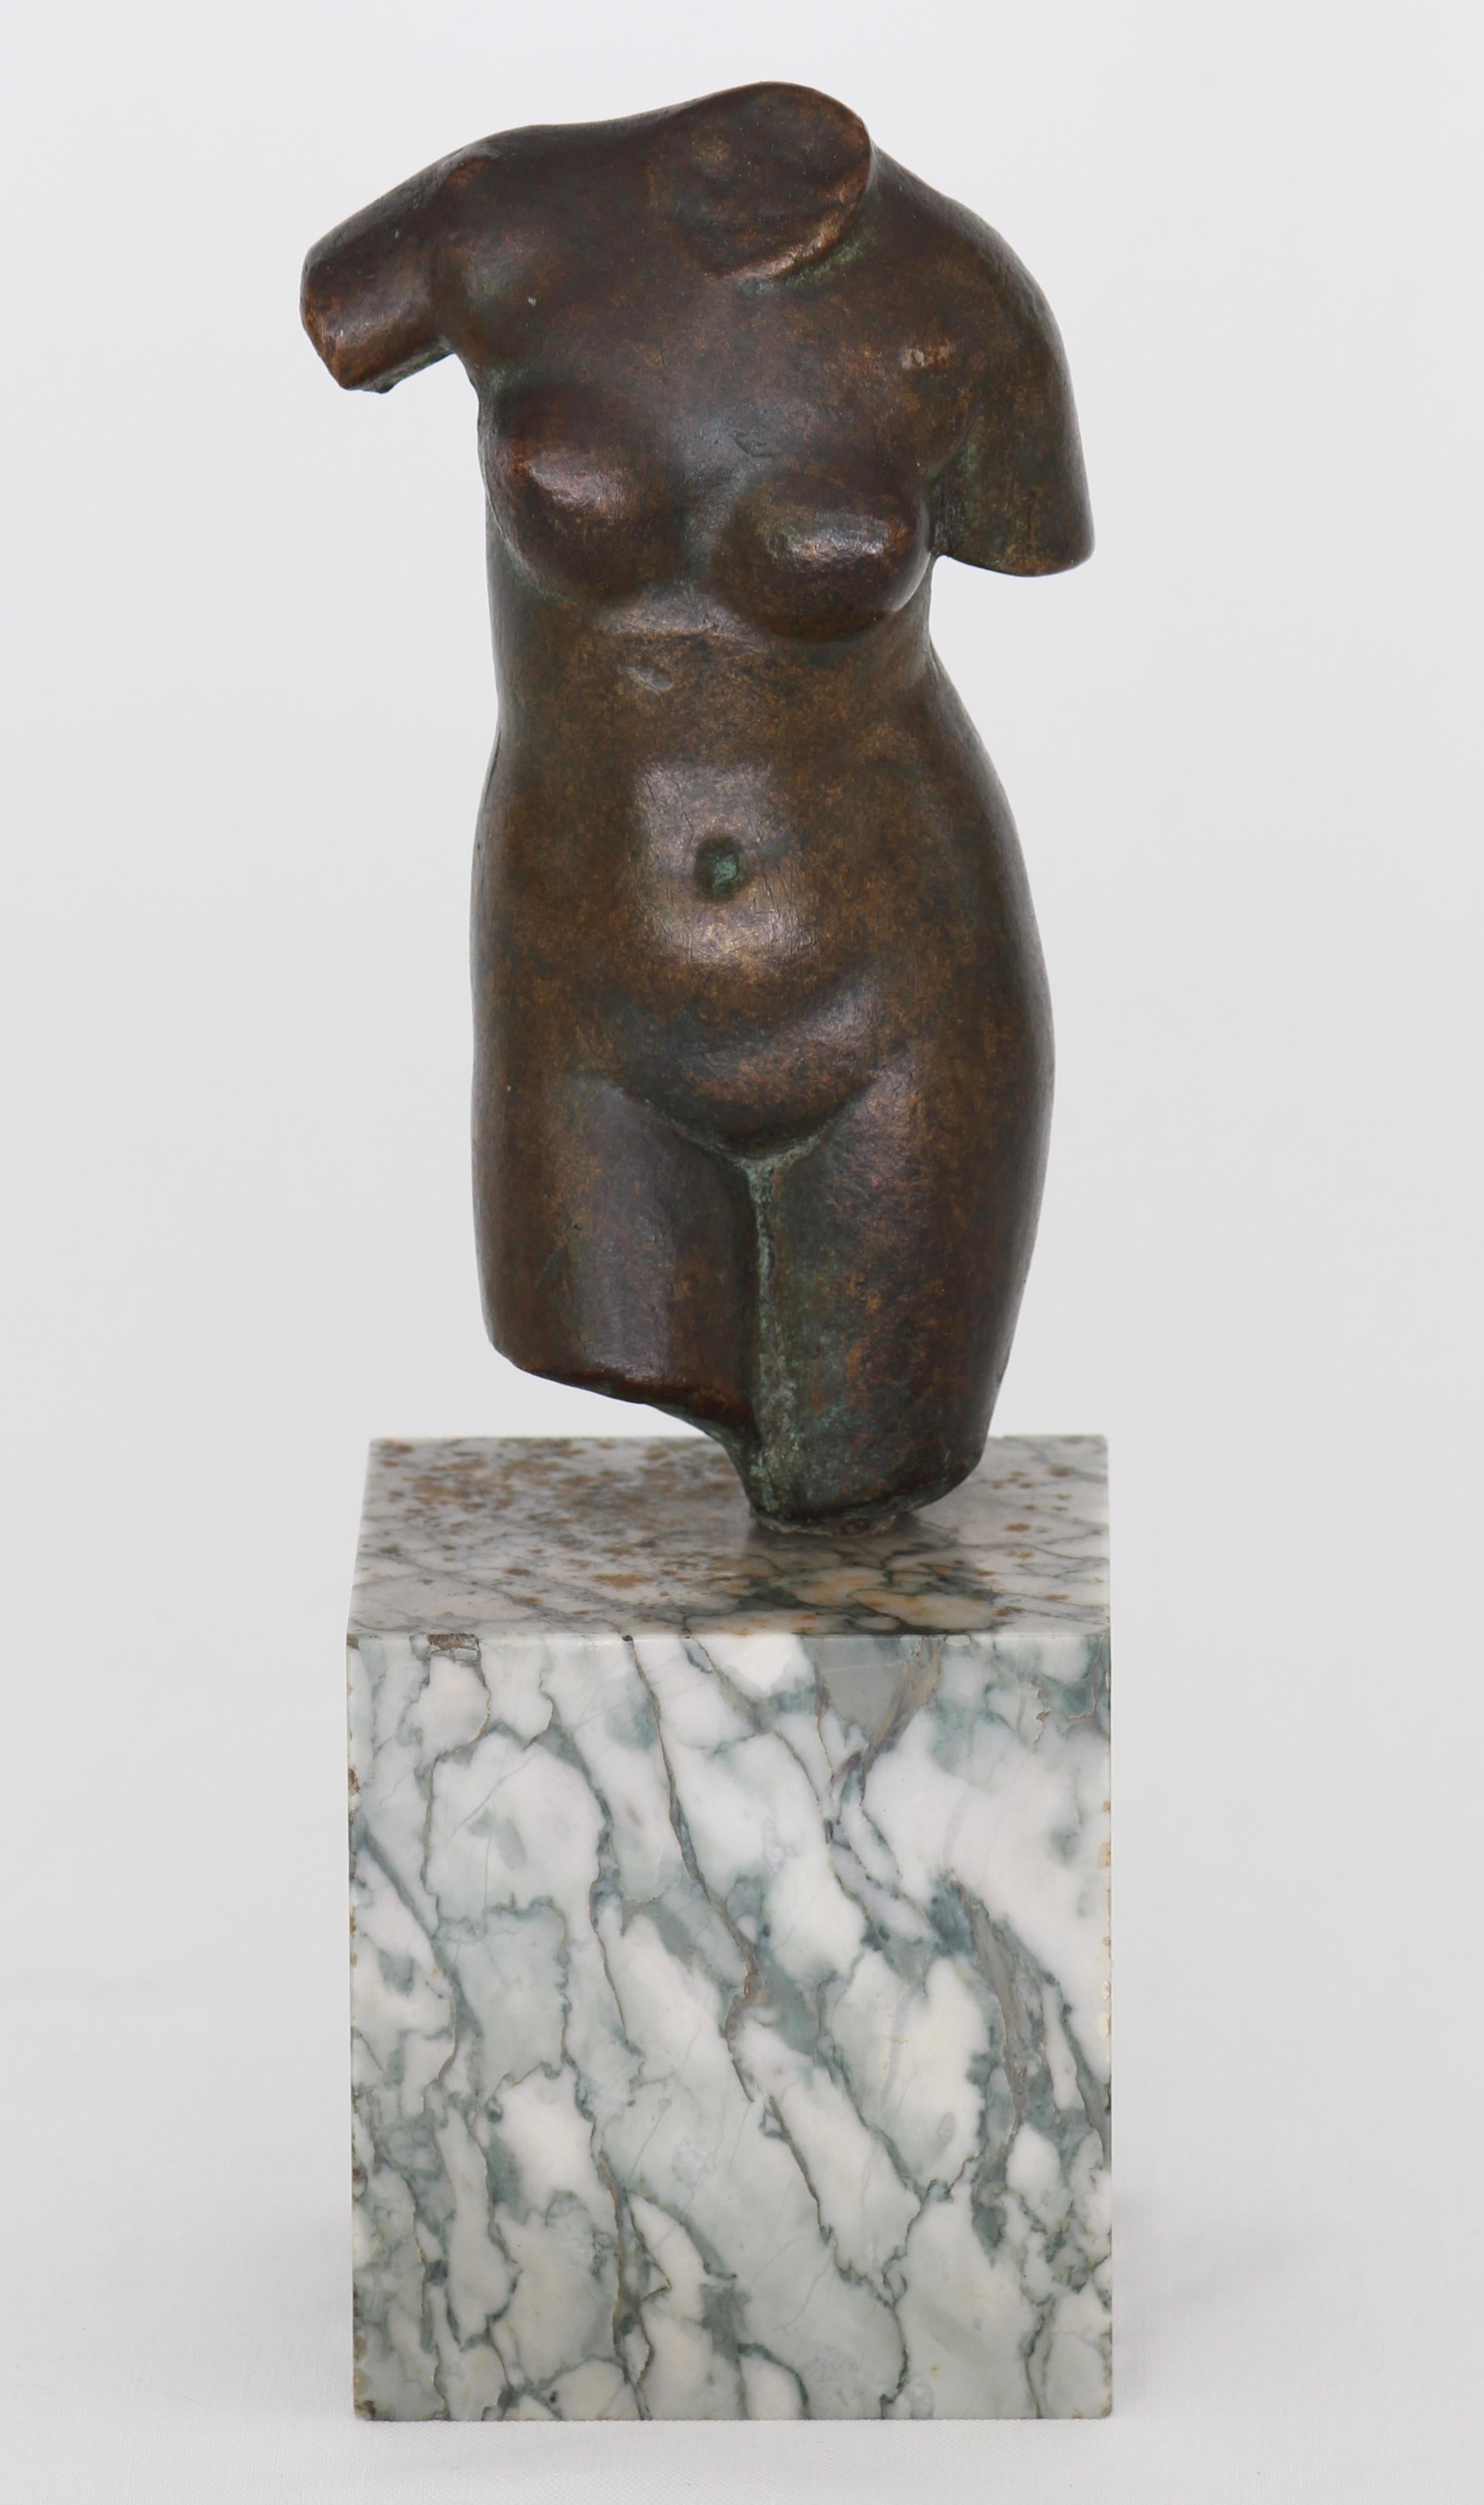 A small solid patinated bronze classical figure of a nude female torso mounted on a marble base.